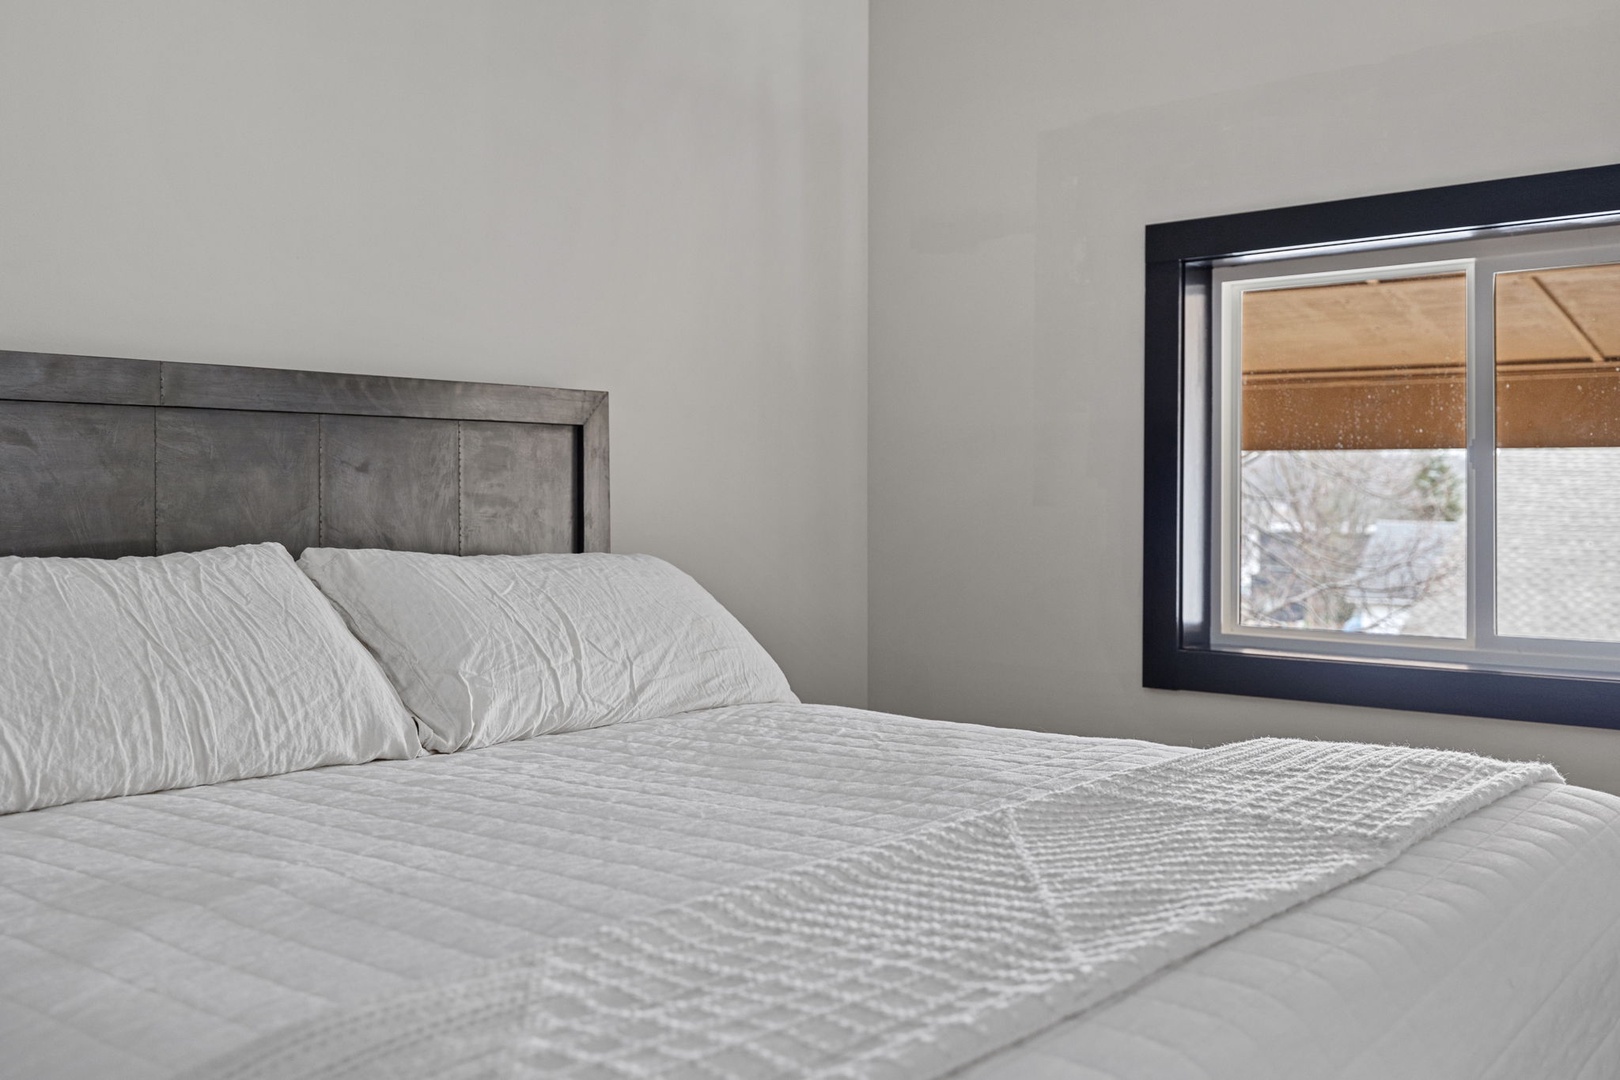 Our commitment to excellence includes use of only top-quality bedding + linens.